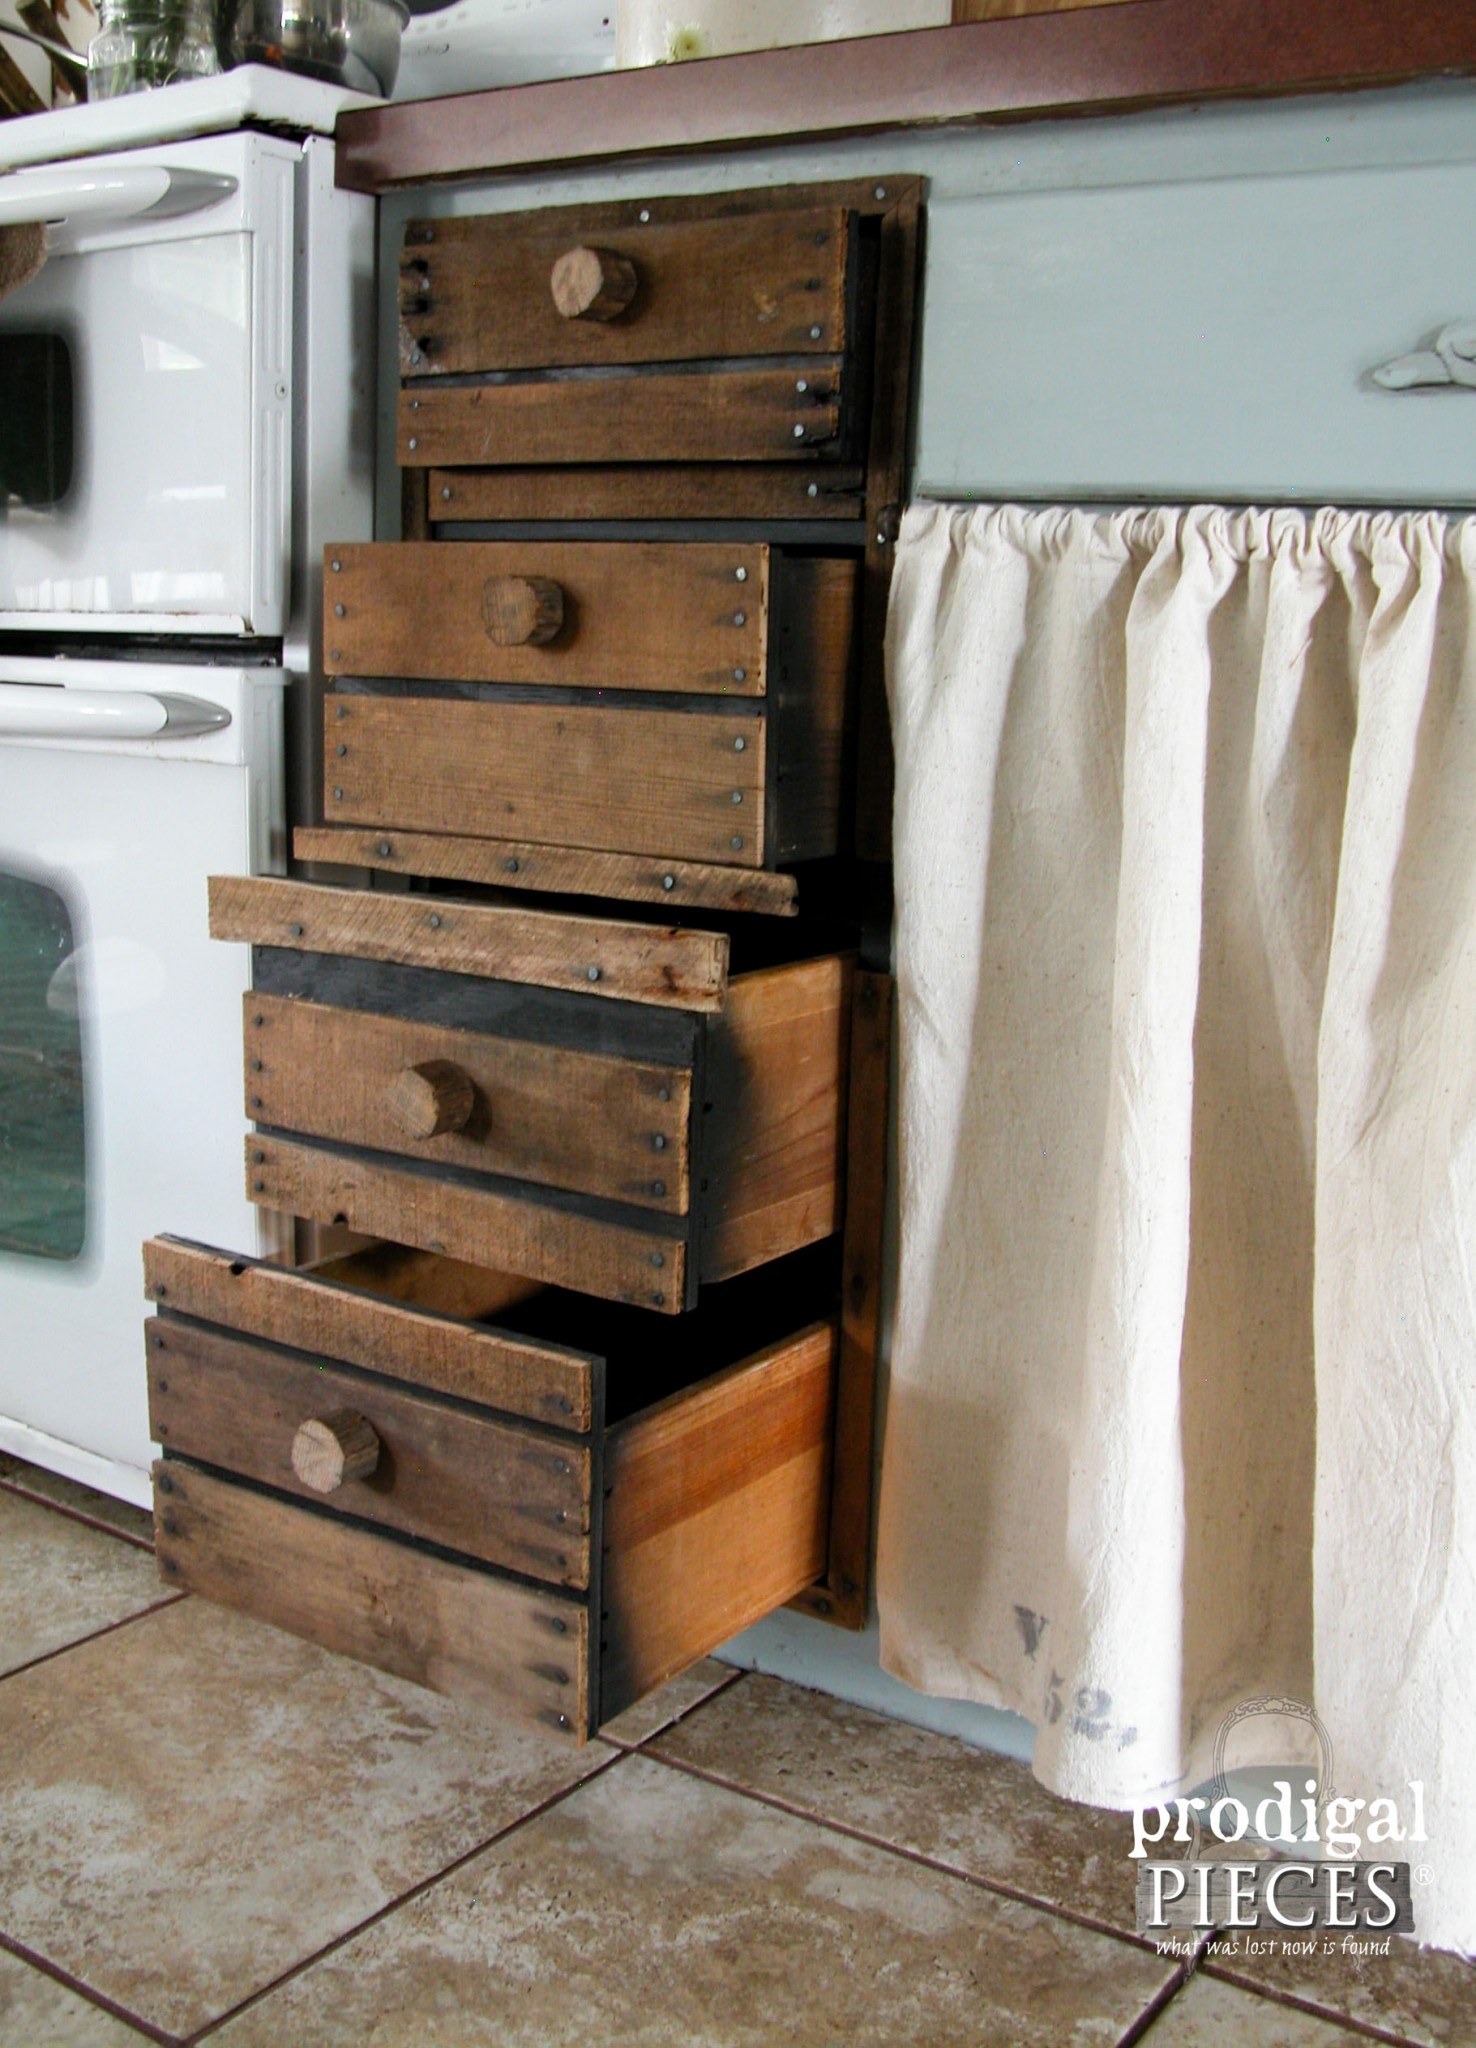 Faux Crate Drawers Open to Four Drawers | Prodigal Pieces | prodigalpieces.com #prodigalpieces